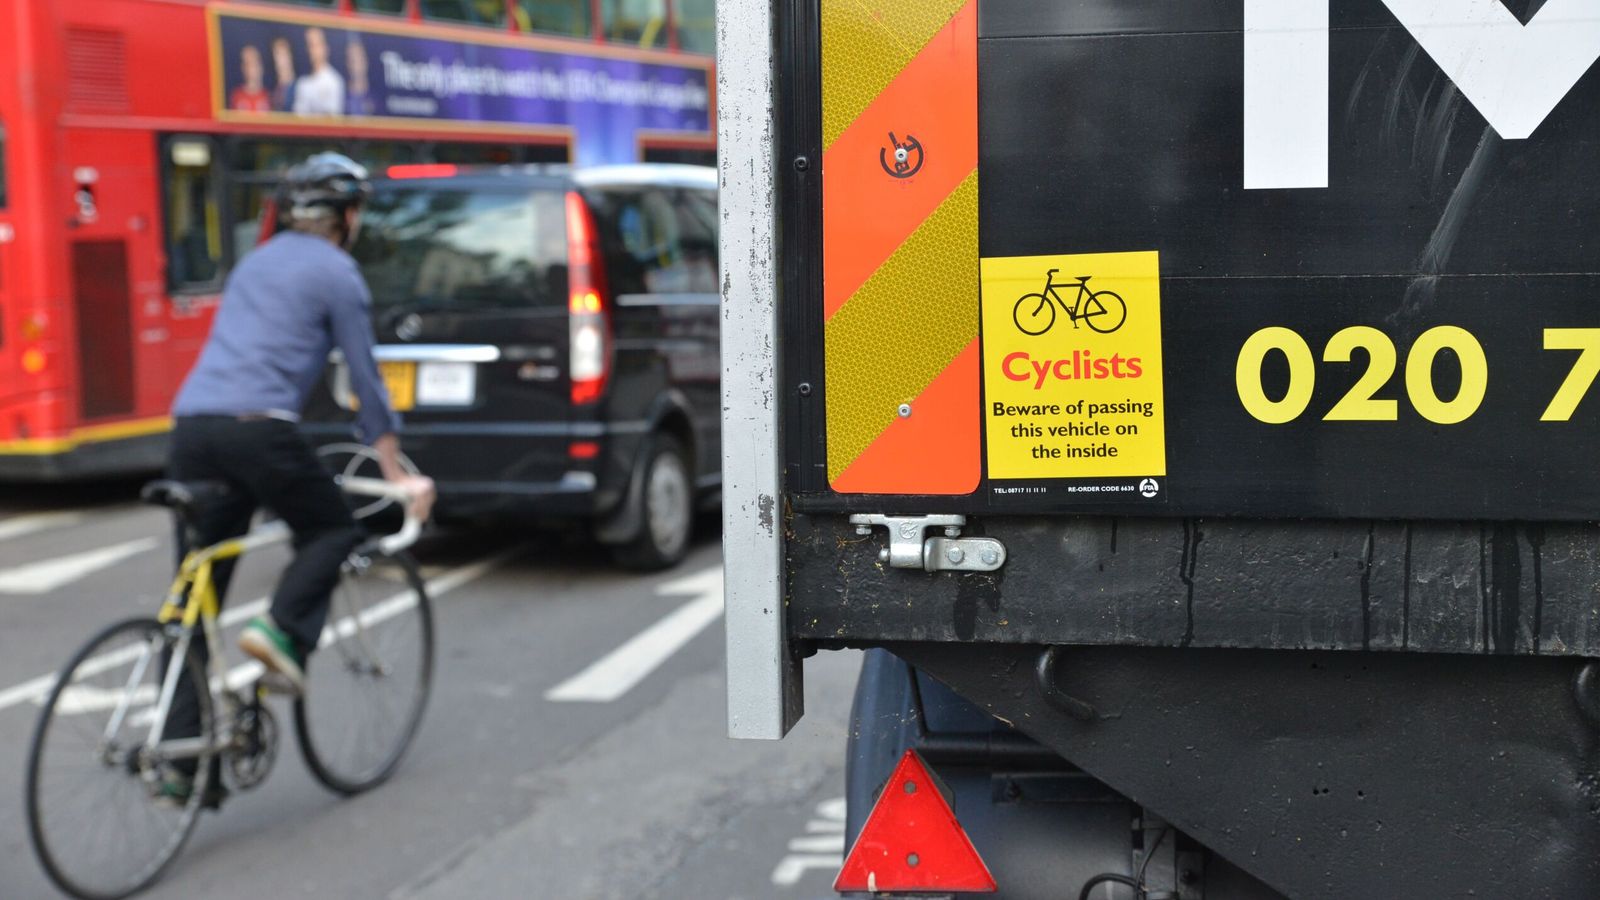 New laws to allow longer lorries on UK roads 'could cost lives' of pedestrians and cyclists